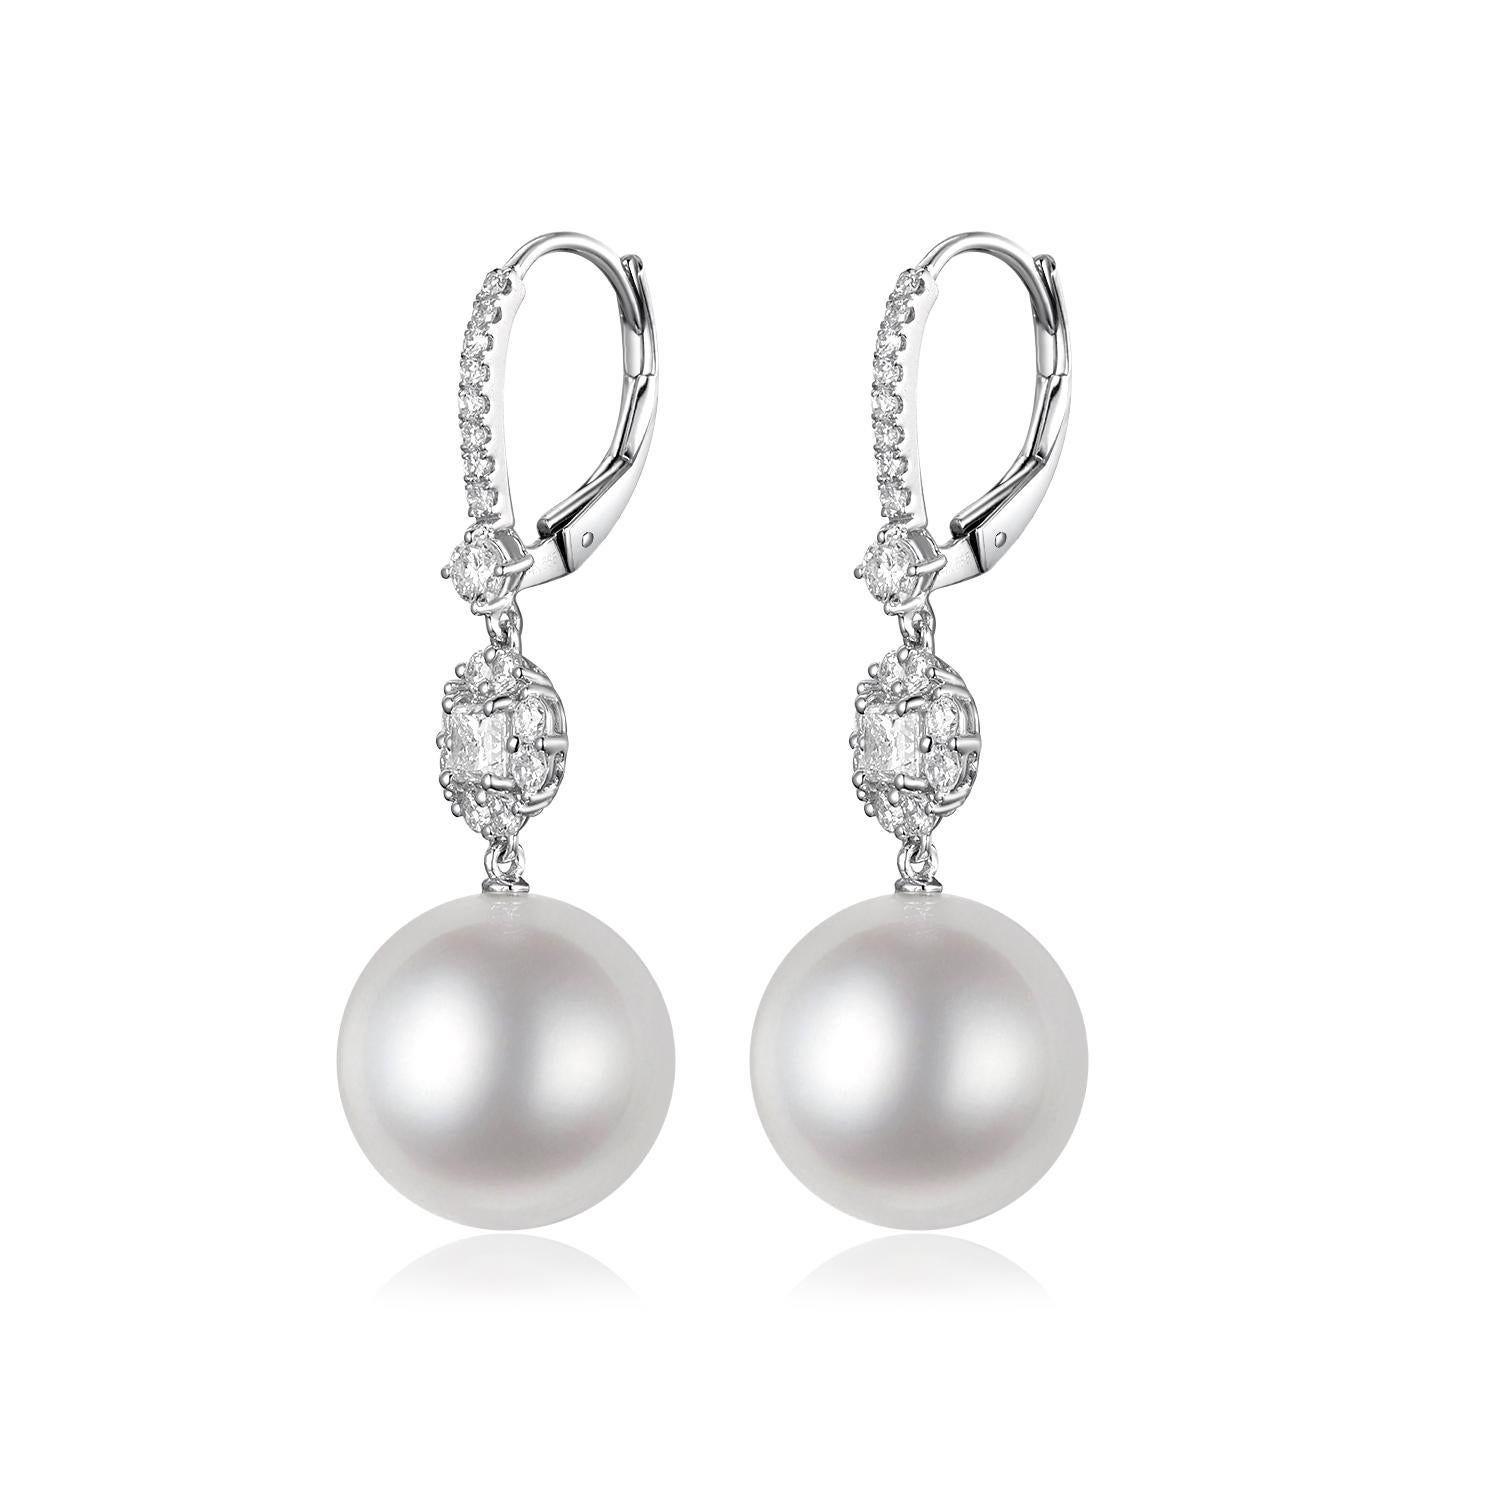 These earrings are a luxurious display of elegance, crafted from 14-karat white gold. Each earring is adorned with a significant 12mm South Sea pearl, renowned for its magnificent size and lustrous shine. The pearls dangle with a poised elegance,